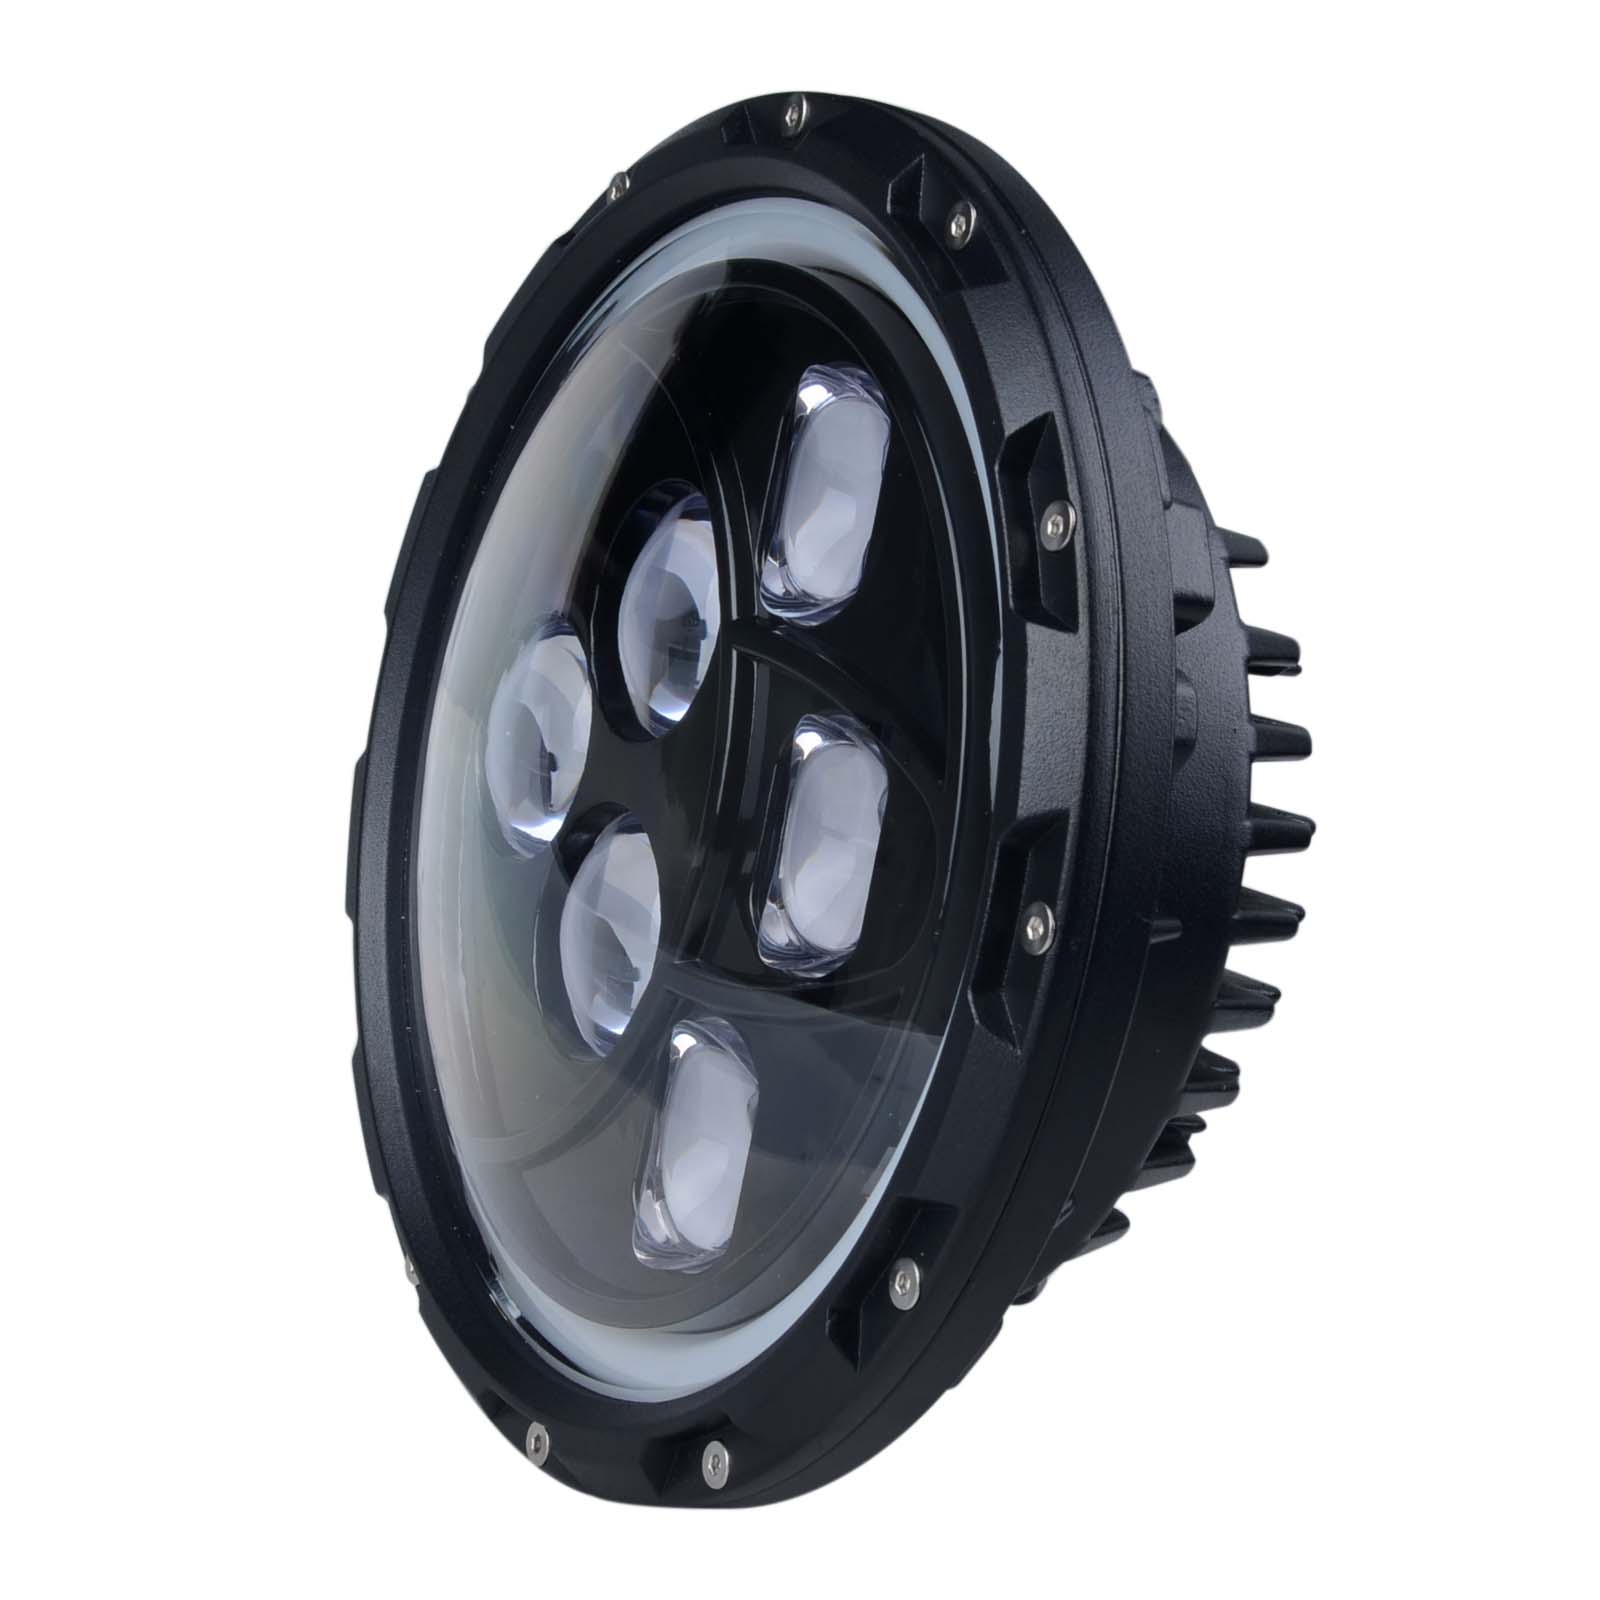 7 inch 60W CREE Round High Beam Low Beam LED Headlight For Jeep Wrangler with Angel Eyes and Daytime Running Light